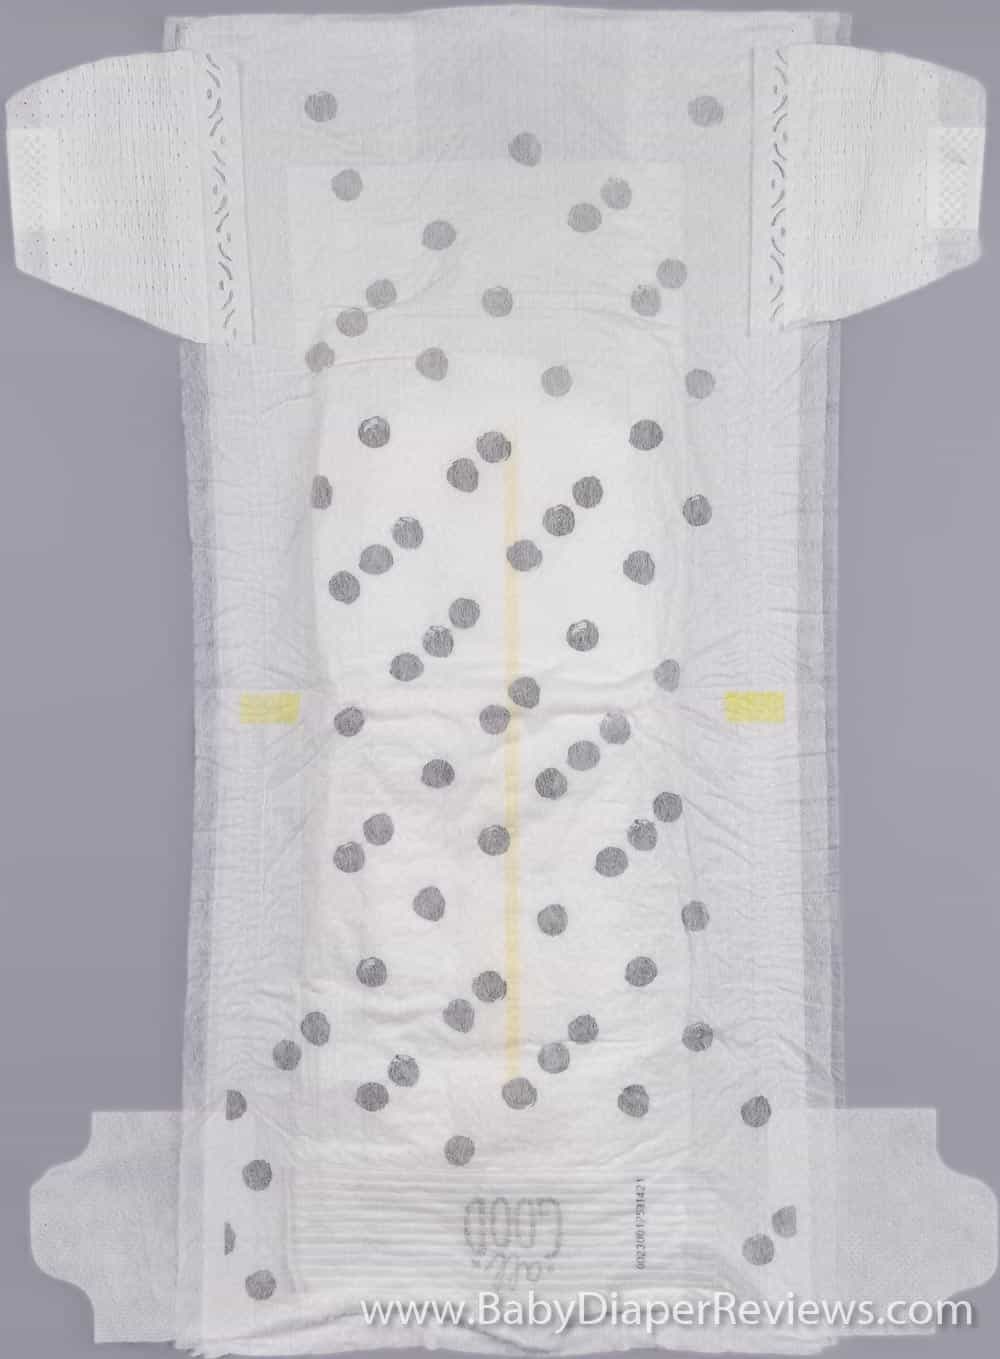 Unfolded picture of dots pattern all good baby diapers